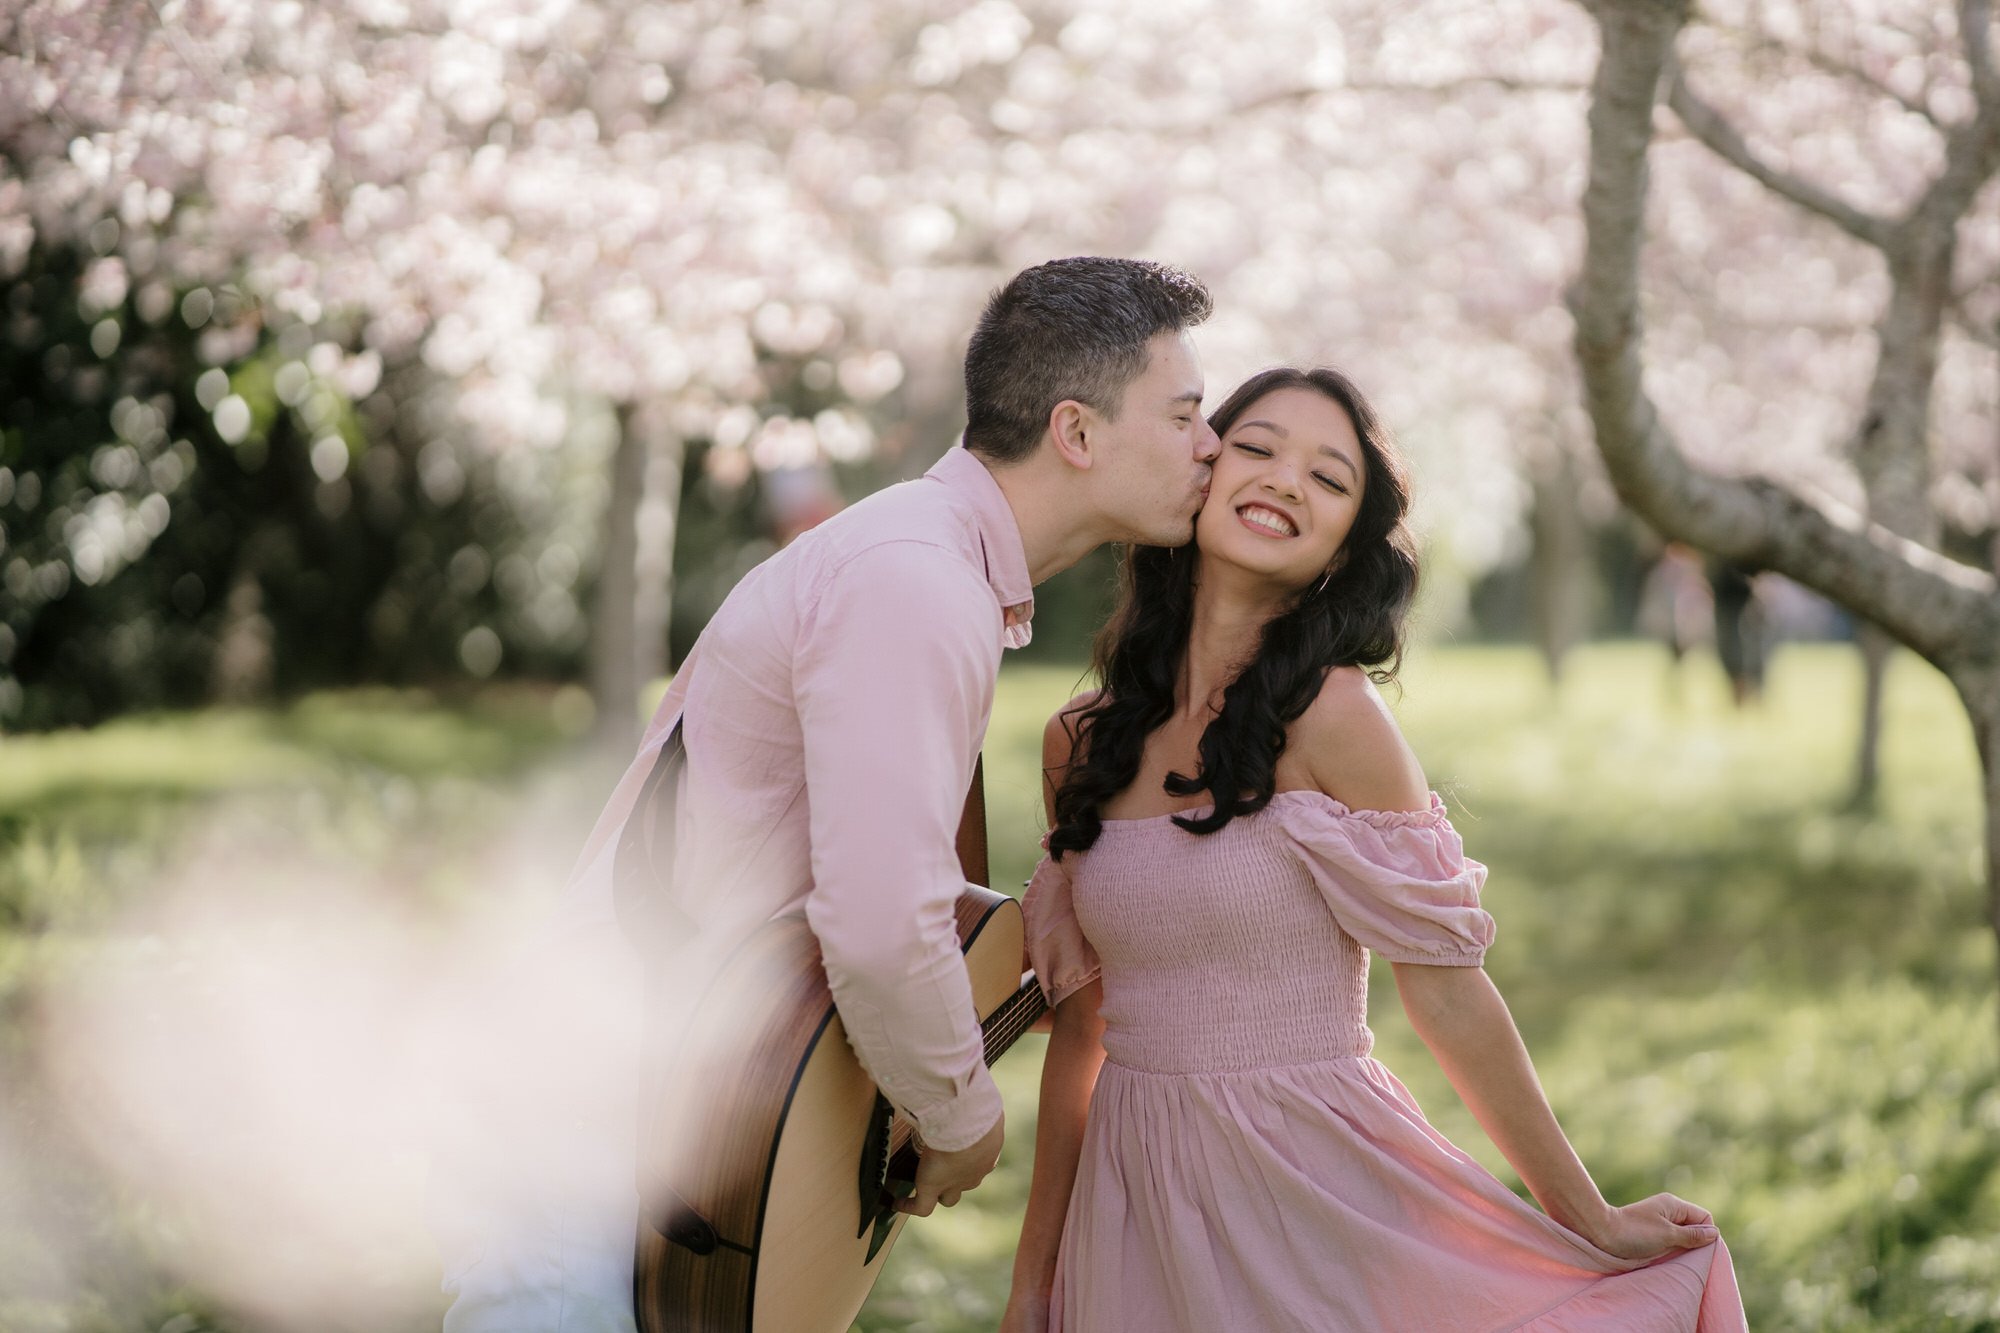 nate-and-thea-singers-duo-2023-top-auckland-wedding-phtographer-photography-videography-film-new-zealand-NZ-best-band-cherry-blossom-botanical-garden-engagement-elopement-dear-white-productions (17).jpg